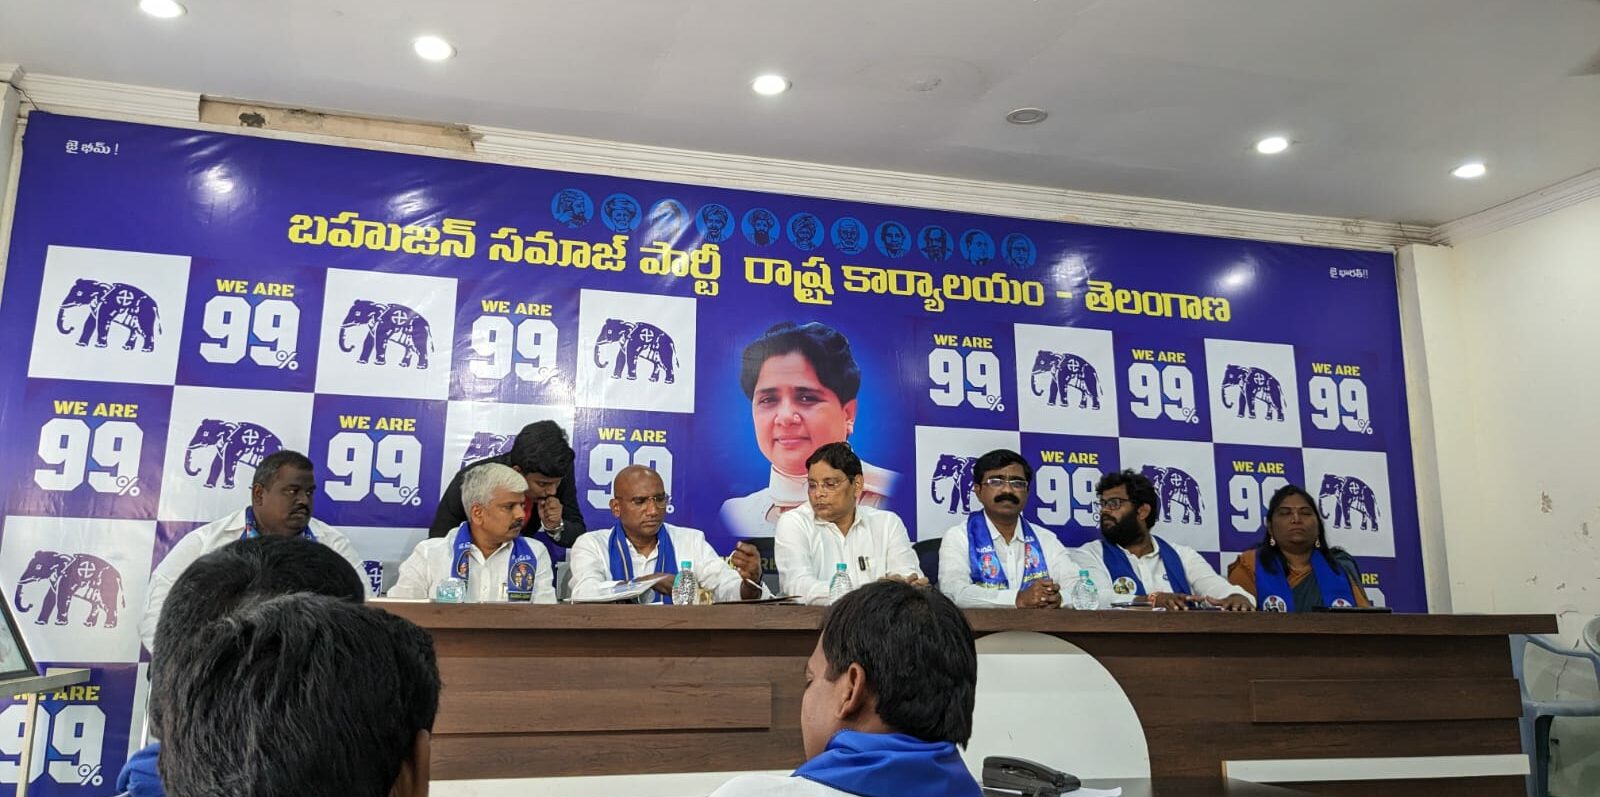 BSP announces 1st list of 20 candidates for Telangana Assembly polls; slams KCR for ‘luring people with schemes’